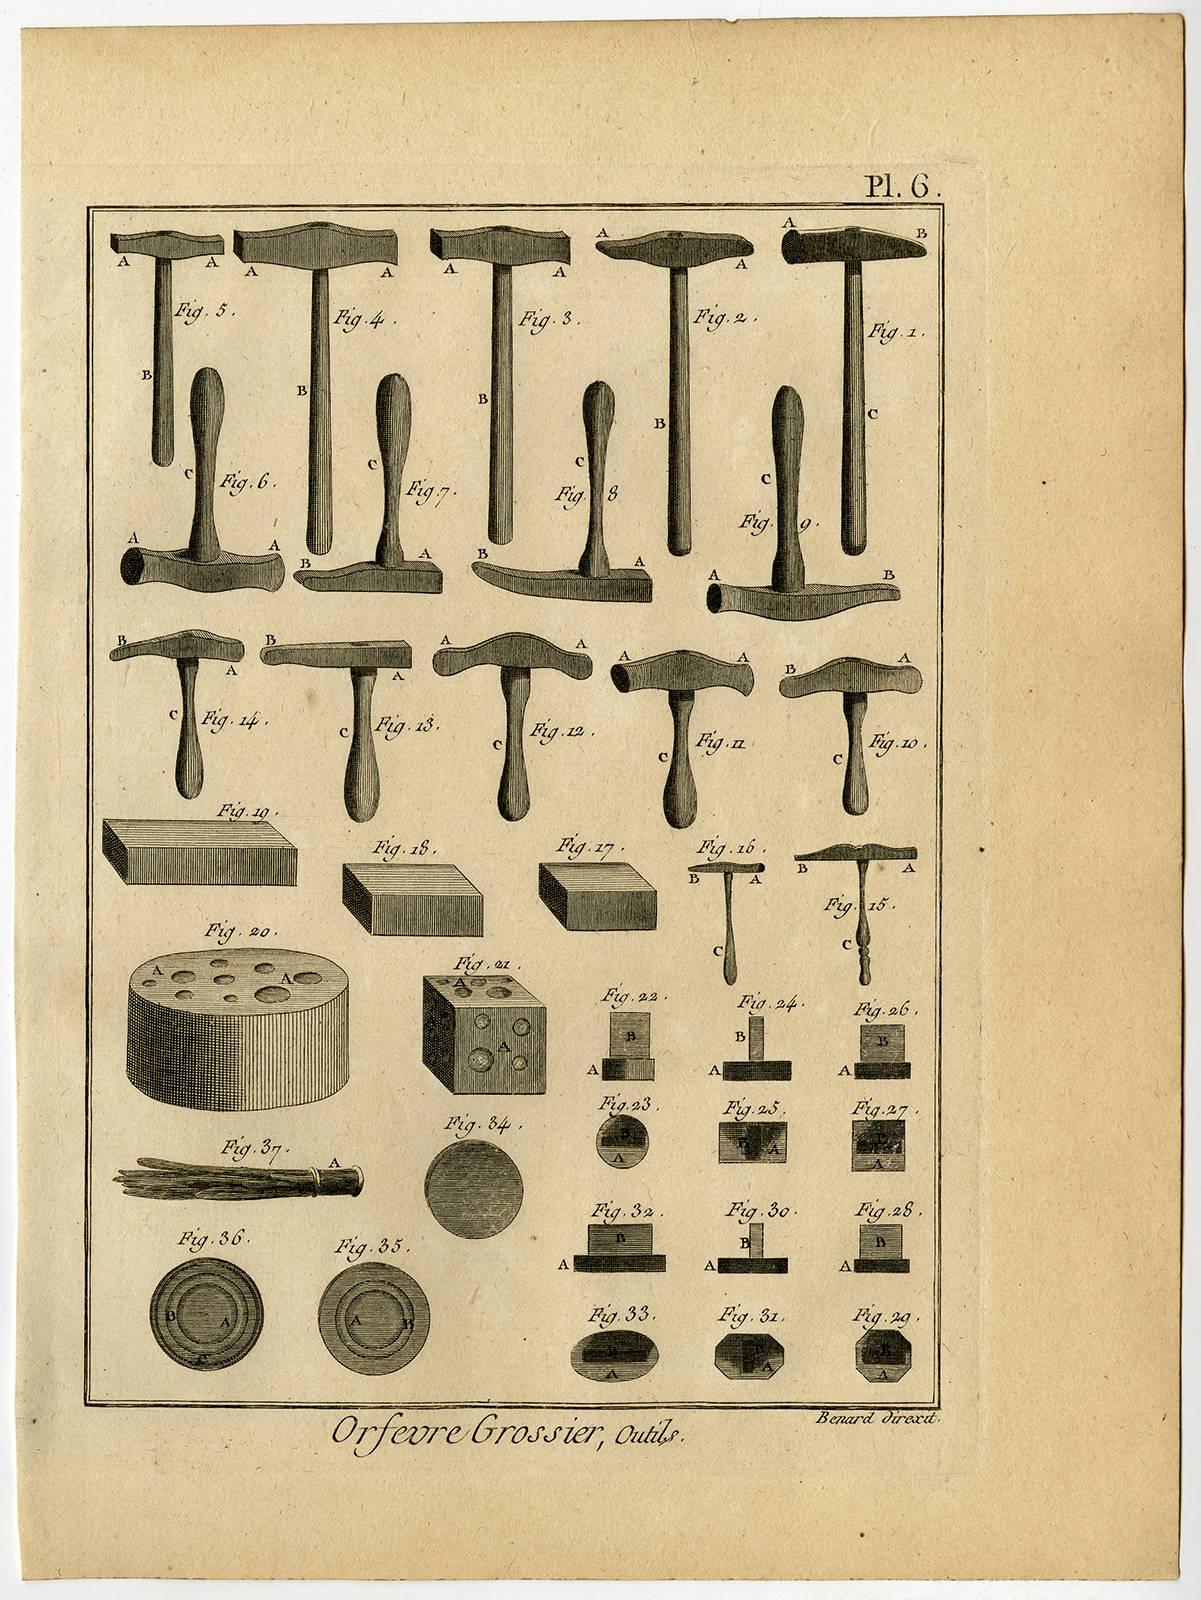 Etching / engraving on hand laid paper.

Plate 1-12: Complete set of 12 plates on Goldsmithing or silversmithing, the art of making objects by a skilled craftsman called goldsmith or silversmith, tools and workshop.

This print originates from